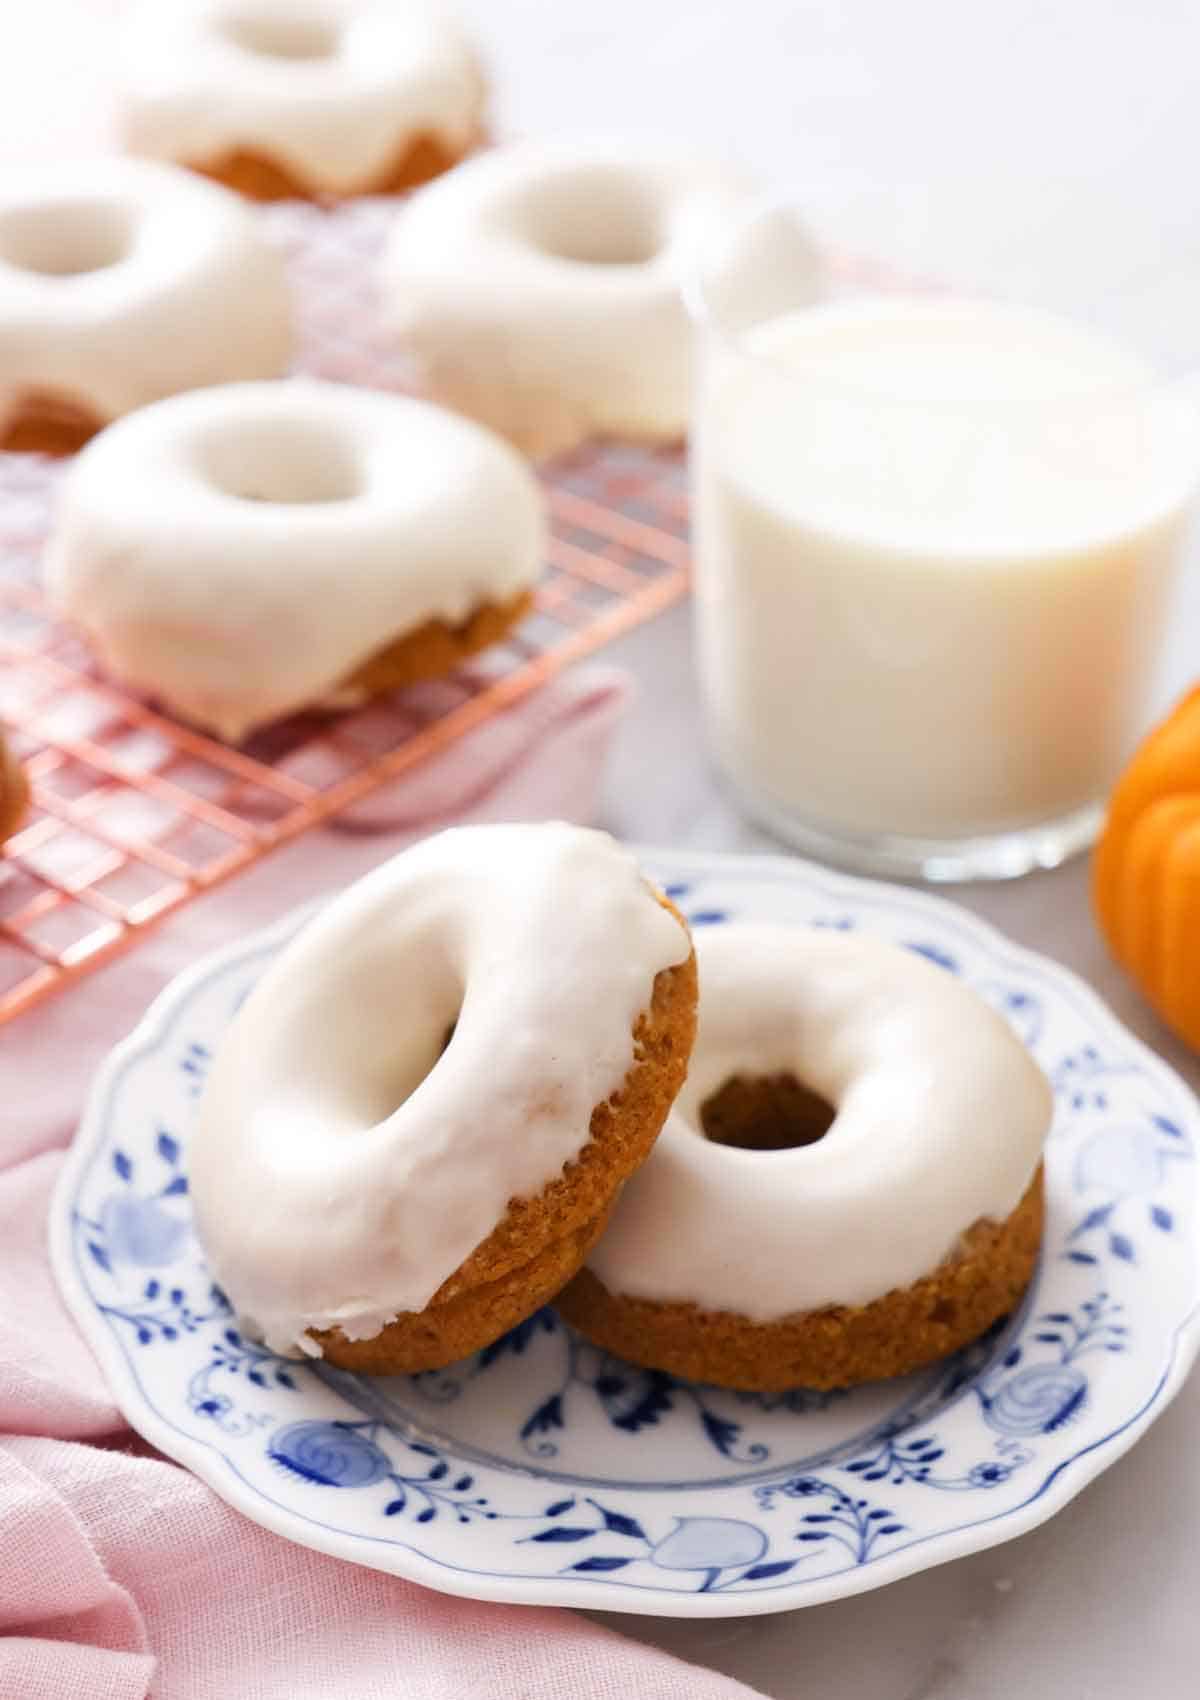 Two glazed pumpkin donuts with one propped against the other on a plate in front of a glass of milk.